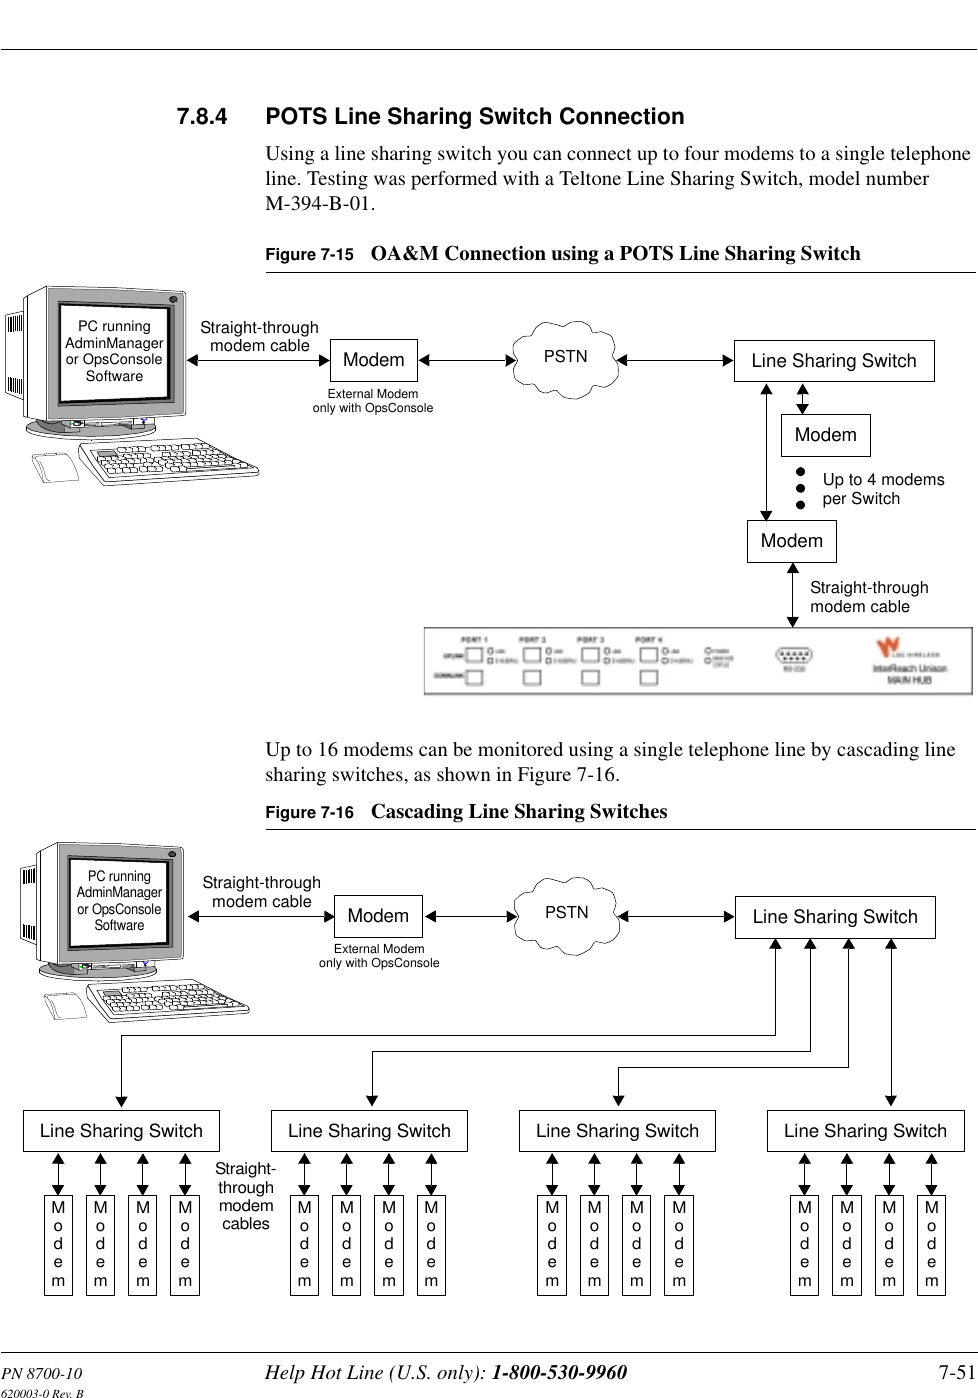 PN 8700-10 Help Hot Line (U.S. only): 1-800-530-9960 7-51620003-0 Rev. B7.8.4 POTS Line Sharing Switch ConnectionUsing a line sharing switch you can connect up to four modems to a single telephone line. Testing was performed with a Teltone Line Sharing Switch, model number M-394-B-01.Figure 7-15 OA&amp;M Connection using a POTS Line Sharing SwitchUp to 16 modems can be monitored using a single telephone line by cascading line sharing switches, as shown in Figure 7-16.Figure 7-16 Cascading Line Sharing SwitchesModemPSTNLine Sharing SwitchUp to 4 modemsper SwitchModemModemStraight-throughmodem cablePC runningor OpsConsoleSoftwareAdminManager Straight-throughmodem cableExternal Modemonly with OpsConsoleModemPSTNLine Sharing SwitchLine Sharing Switch Line Sharing Switch Line Sharing Switch Line Sharing SwitchModemModemModemModemModemModemModemModemModemModemModemModemModemModemModemModemPC runningor OpsConsoleSoftwareAdminManagerStraight-throughmodem cableStraight-throughmodemcablesExternal Modemonly with OpsConsole